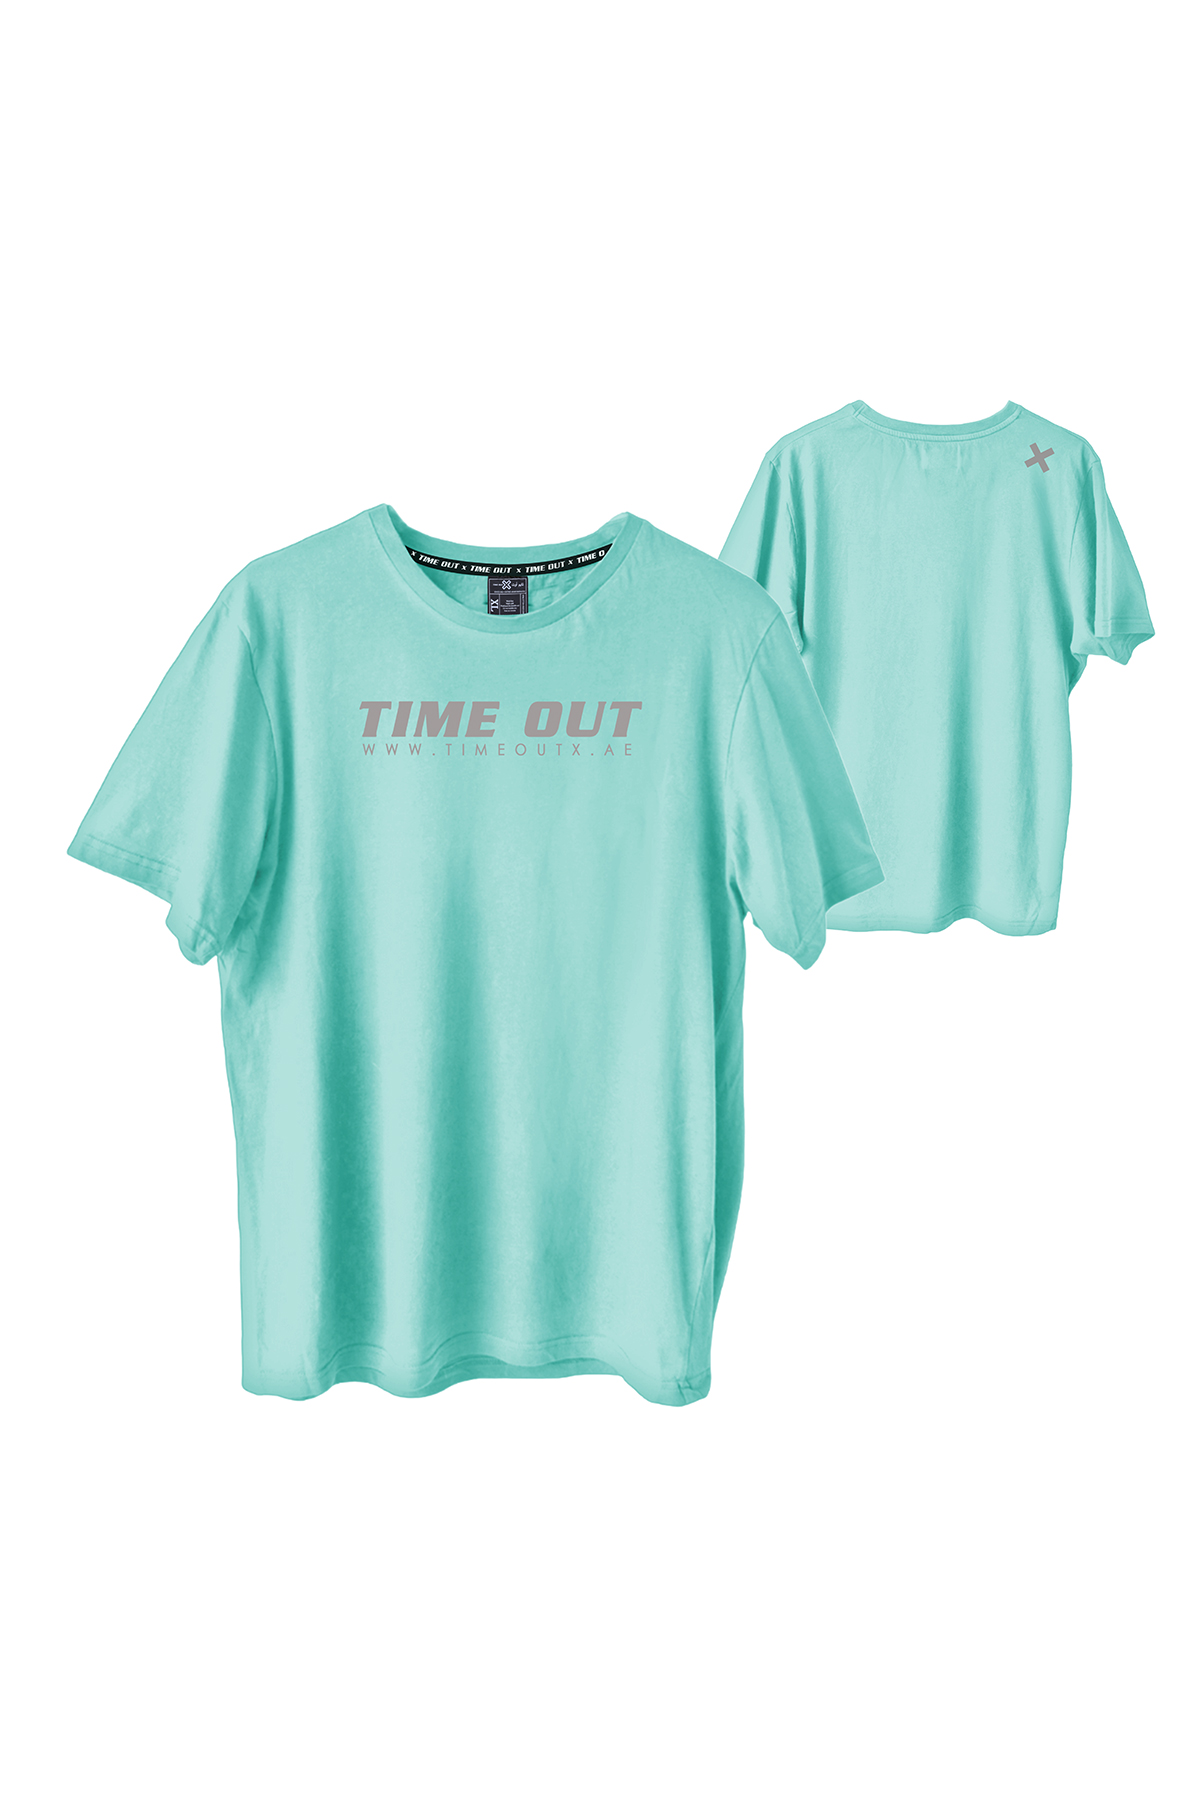 Time-Out-X-Signature-Athleisure-Logo-T-Shirt—Light-Aqua—Front-and-Back